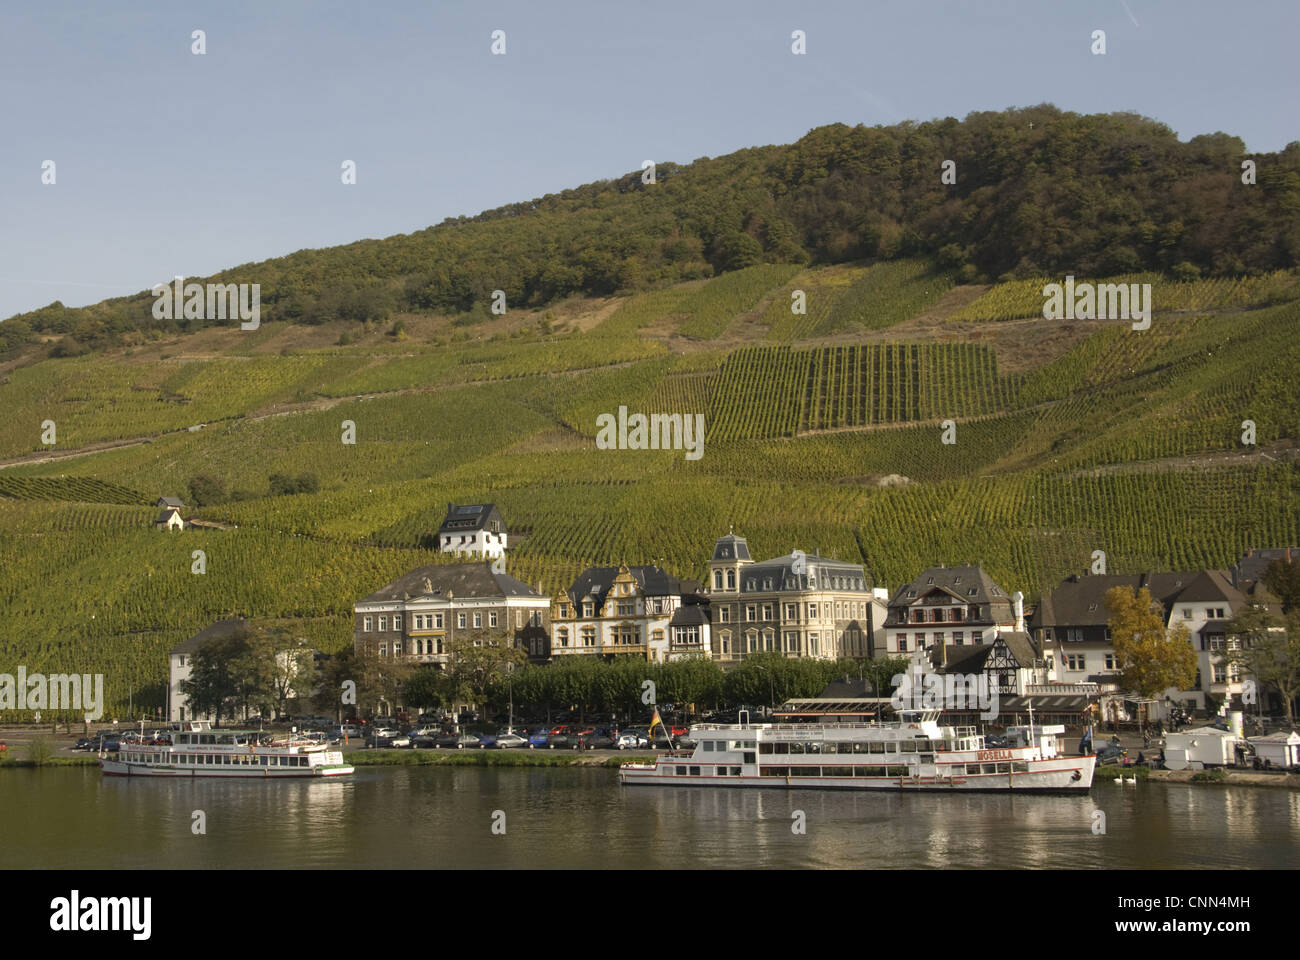 View of tourist boats on river, town and vineyard on hillside, River Mosel, Bernkastel, Rhineland-Palatinate, Germany Stock Photo